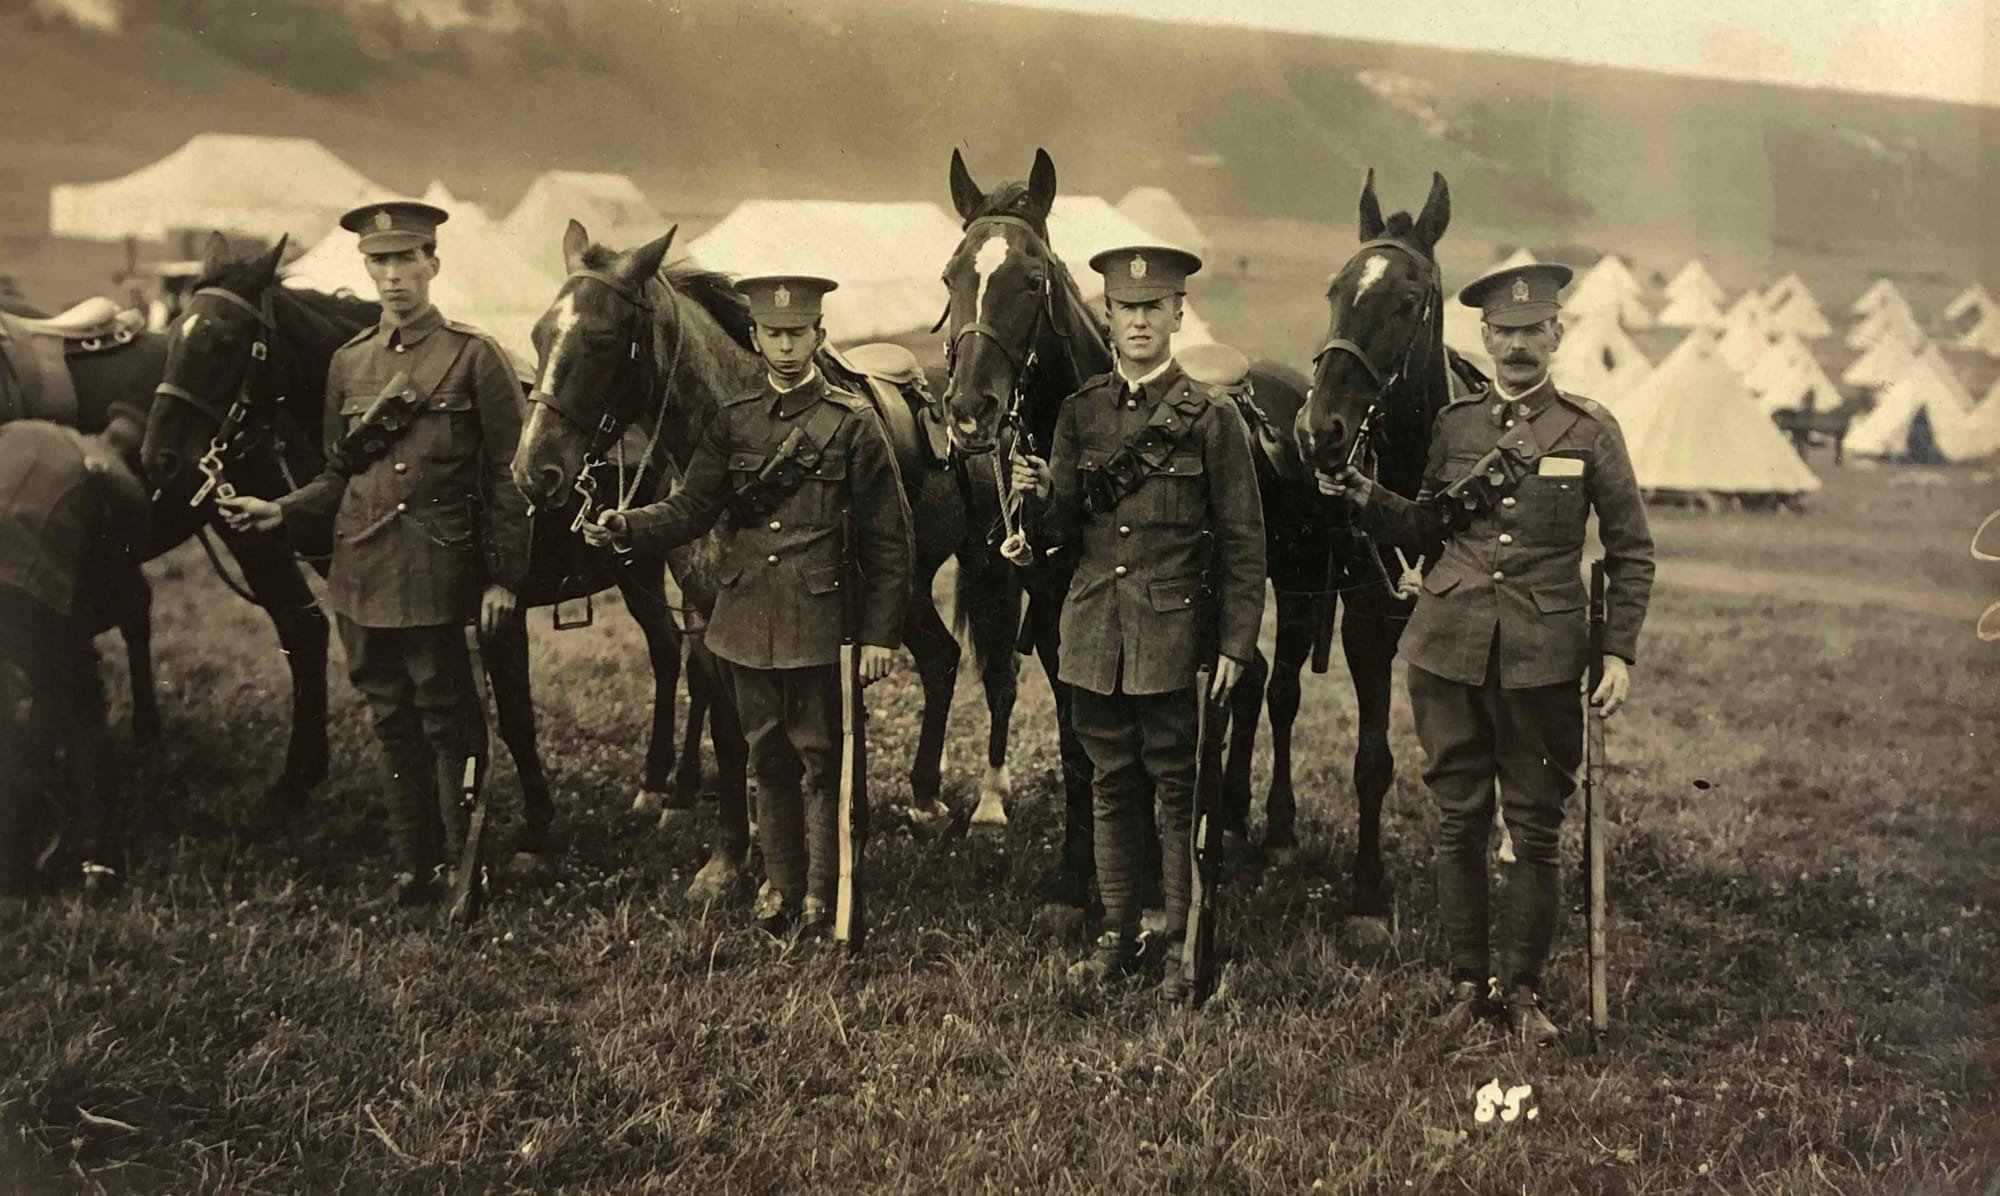 Serjeant Sid Bromfield and four Other Ranks of King Edward’s Horse in Service Dress circa 1913. They are equipped with 1903 pattern, Mounted Infantry leather 50 round .303 bandoliers and are wearing King Edward’s Horse headdress badges. Serjeant Bromfield is wearing ‘B’ Squadron (British American) collar badges which as noted above denotes his proud service in the former King’s Colonials.